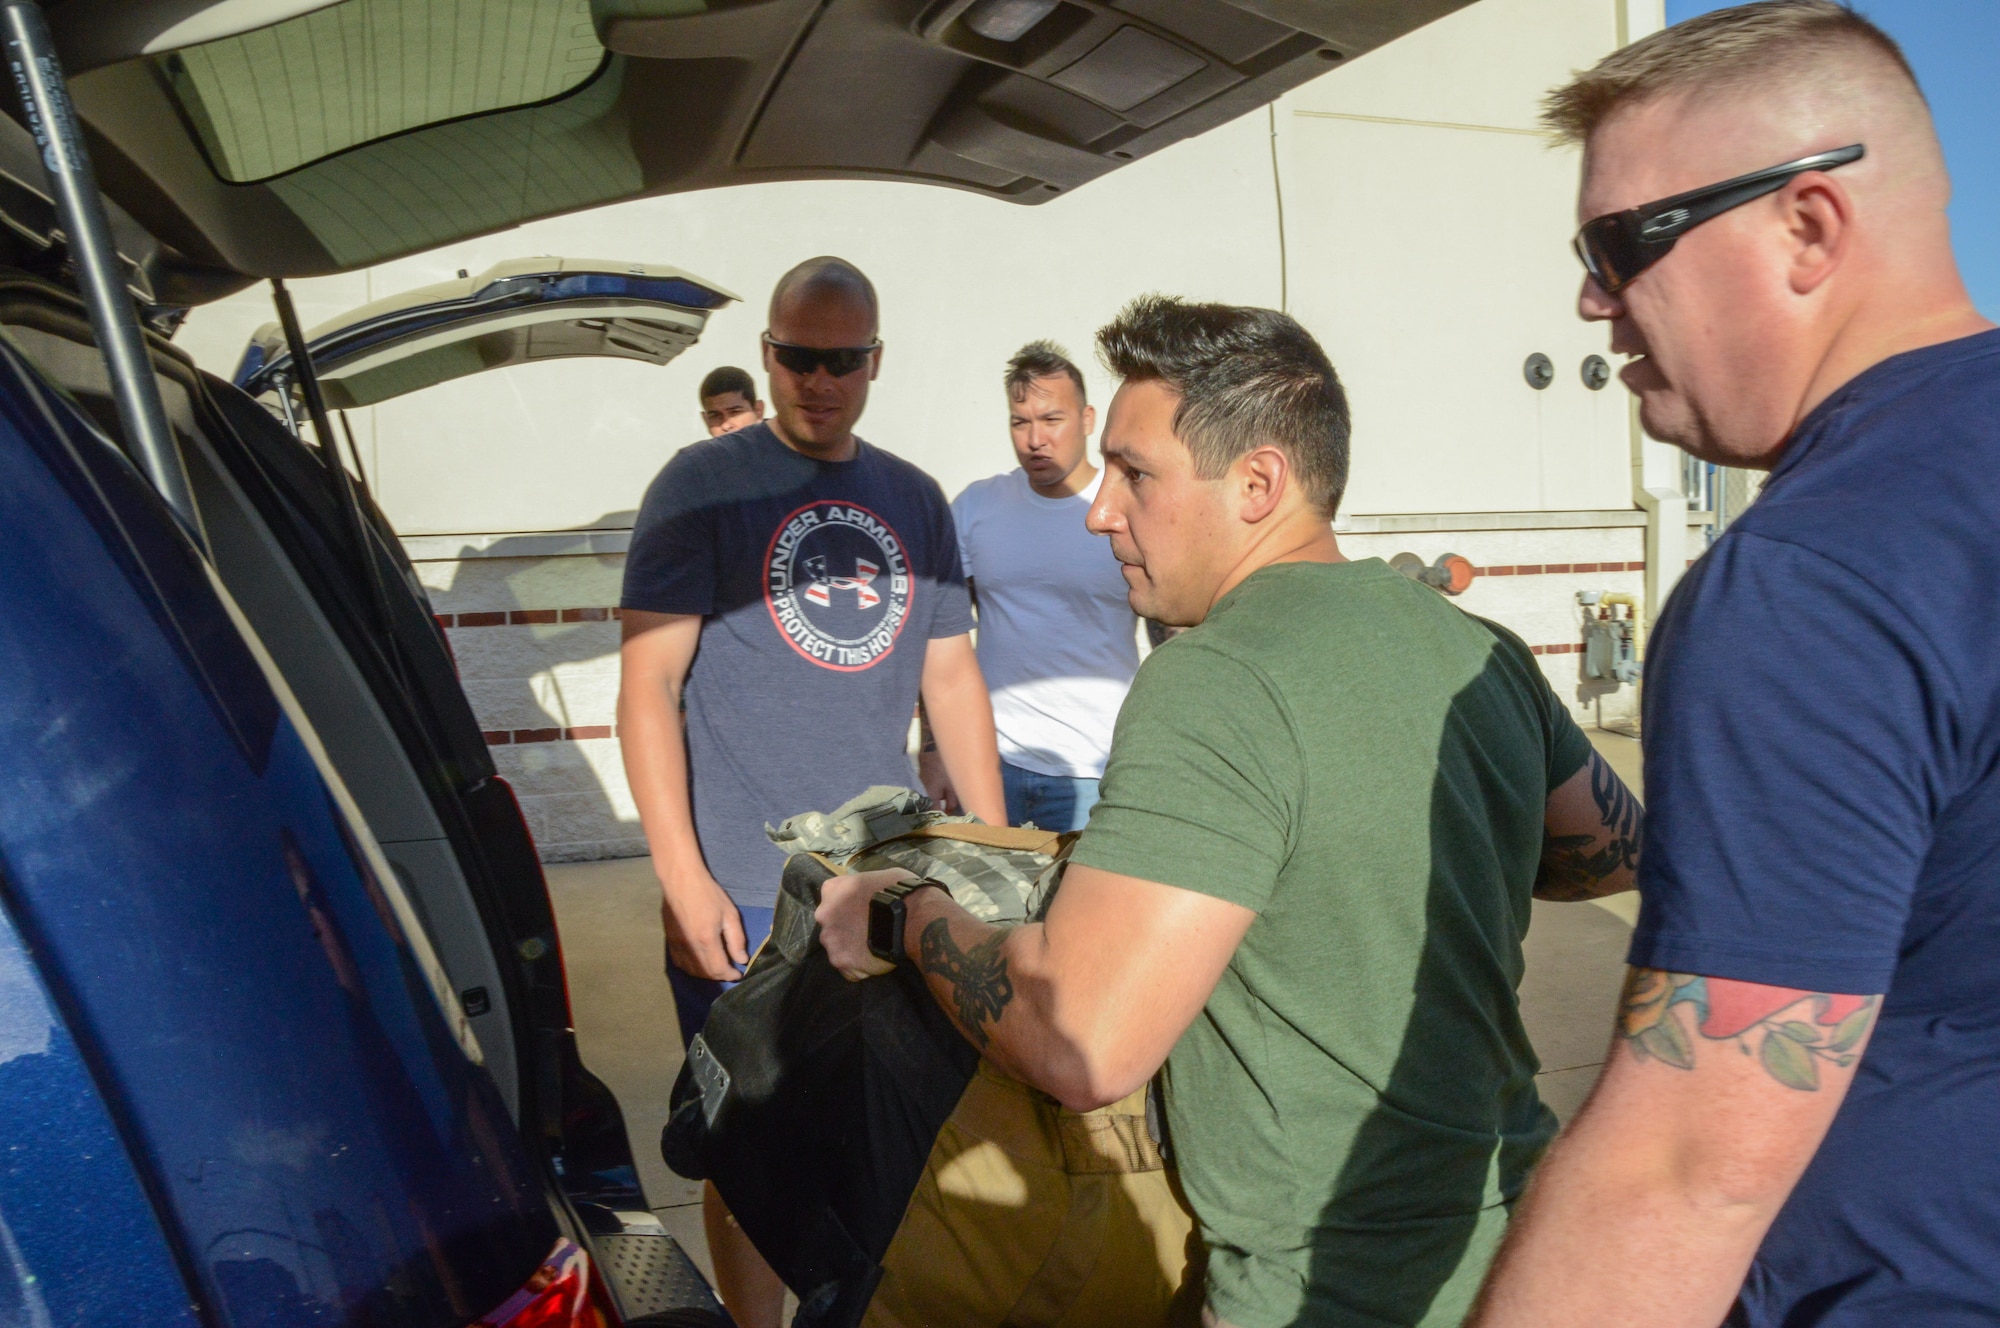 MSgt Christopher Nance, the NCOIC of combat arms for the 136th Security Forces Squadron, SSgt Joseph Ugalde, and SSgt Adam Webster, security forces members, load gear to provide security in honor of former President George H. W. Bush Dec. 1, 2018, at NAS Fort Worth JRB, Texas. The Airmen augmented the 147th Security Forces Squadron to provide ceremonial support during the funeral of George H. W. Bush, the 41st President of the United States. (U.S. Air National Guard photo by Tech. Sgt. Lynn M. Means)